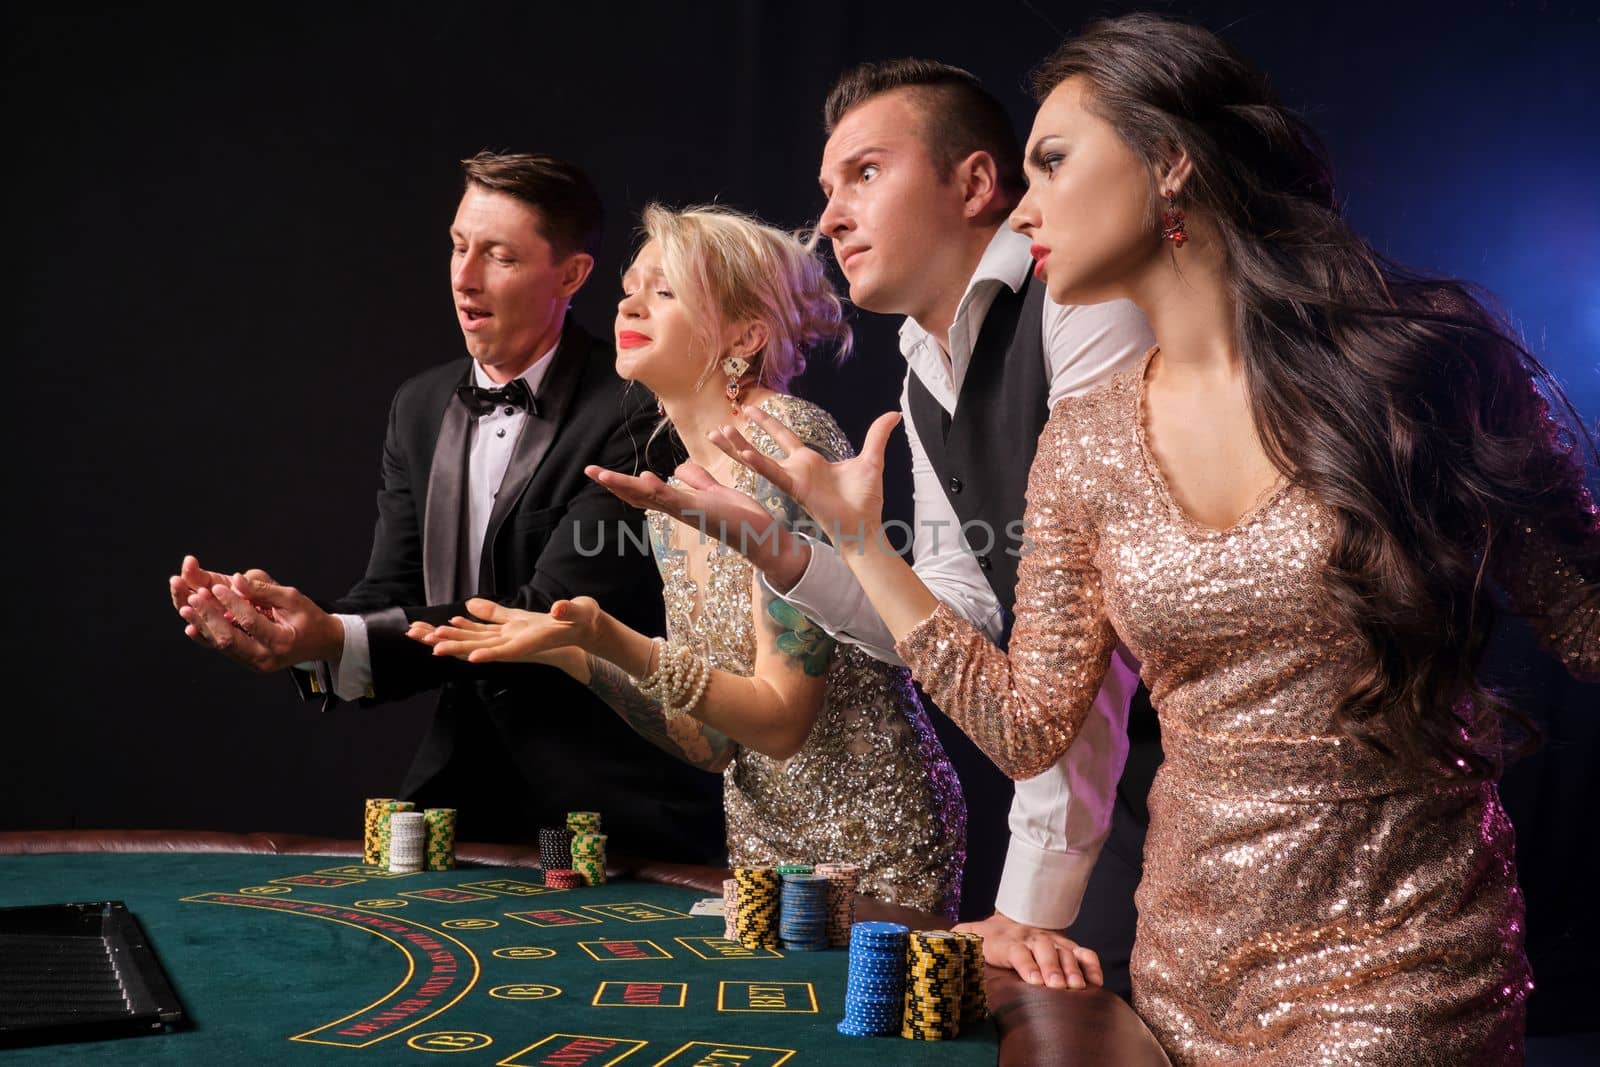 Side shot of a stylish rich friends playing poker at casino. Youth have lose. They are looking angry standing at the table against a red and blue backlights on black background. Risky gambling entertainment.